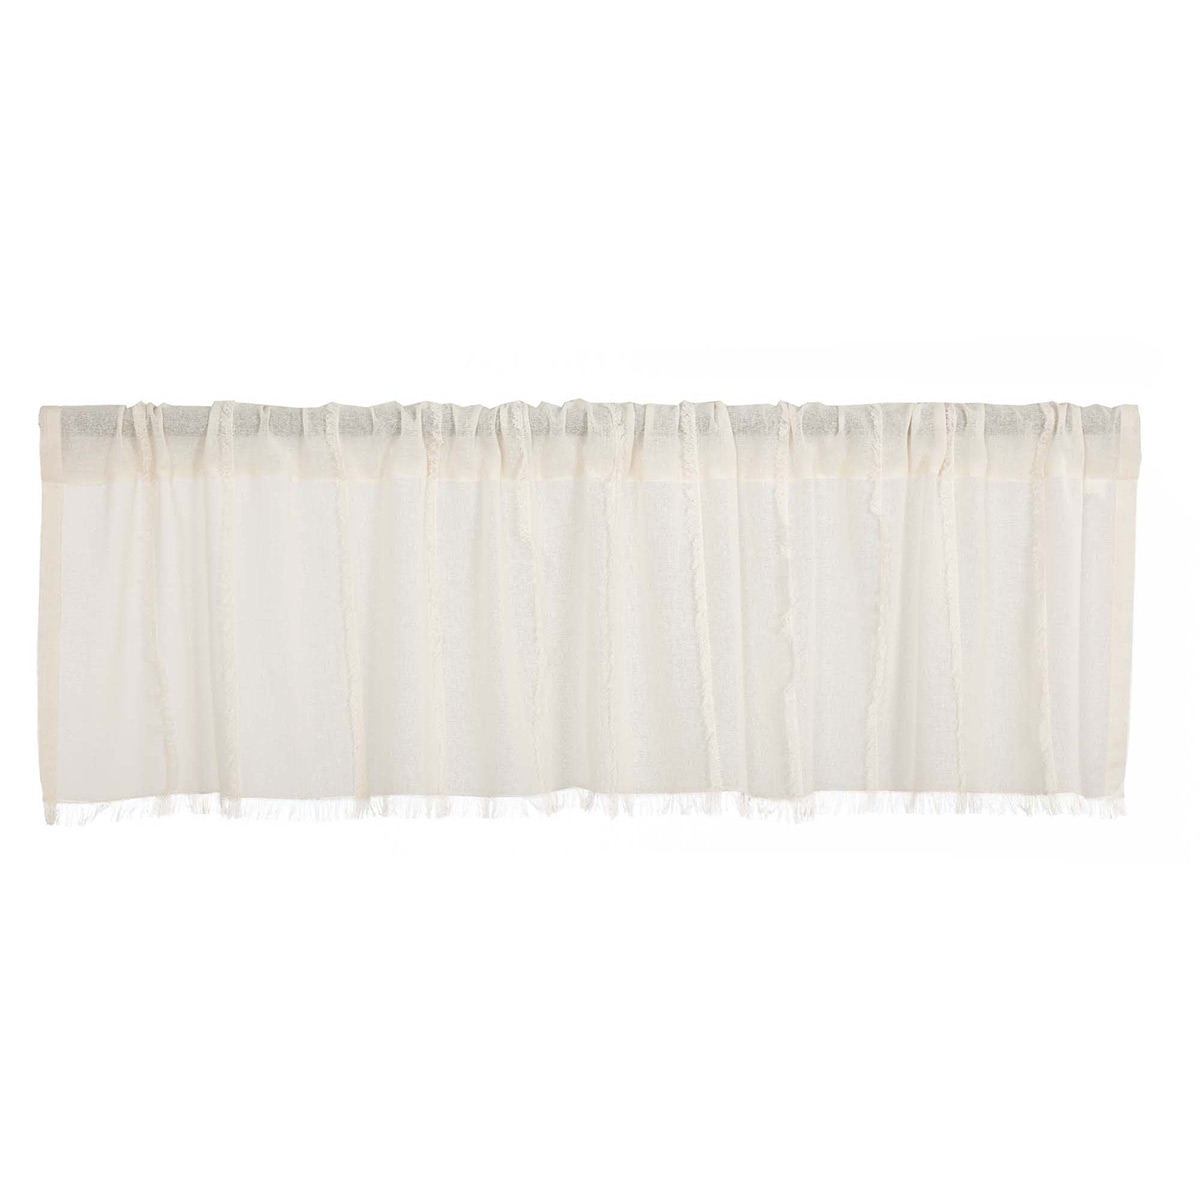 Tobacco Cloth Antique White Patchwork 72 inch Valance - The Weed Patch